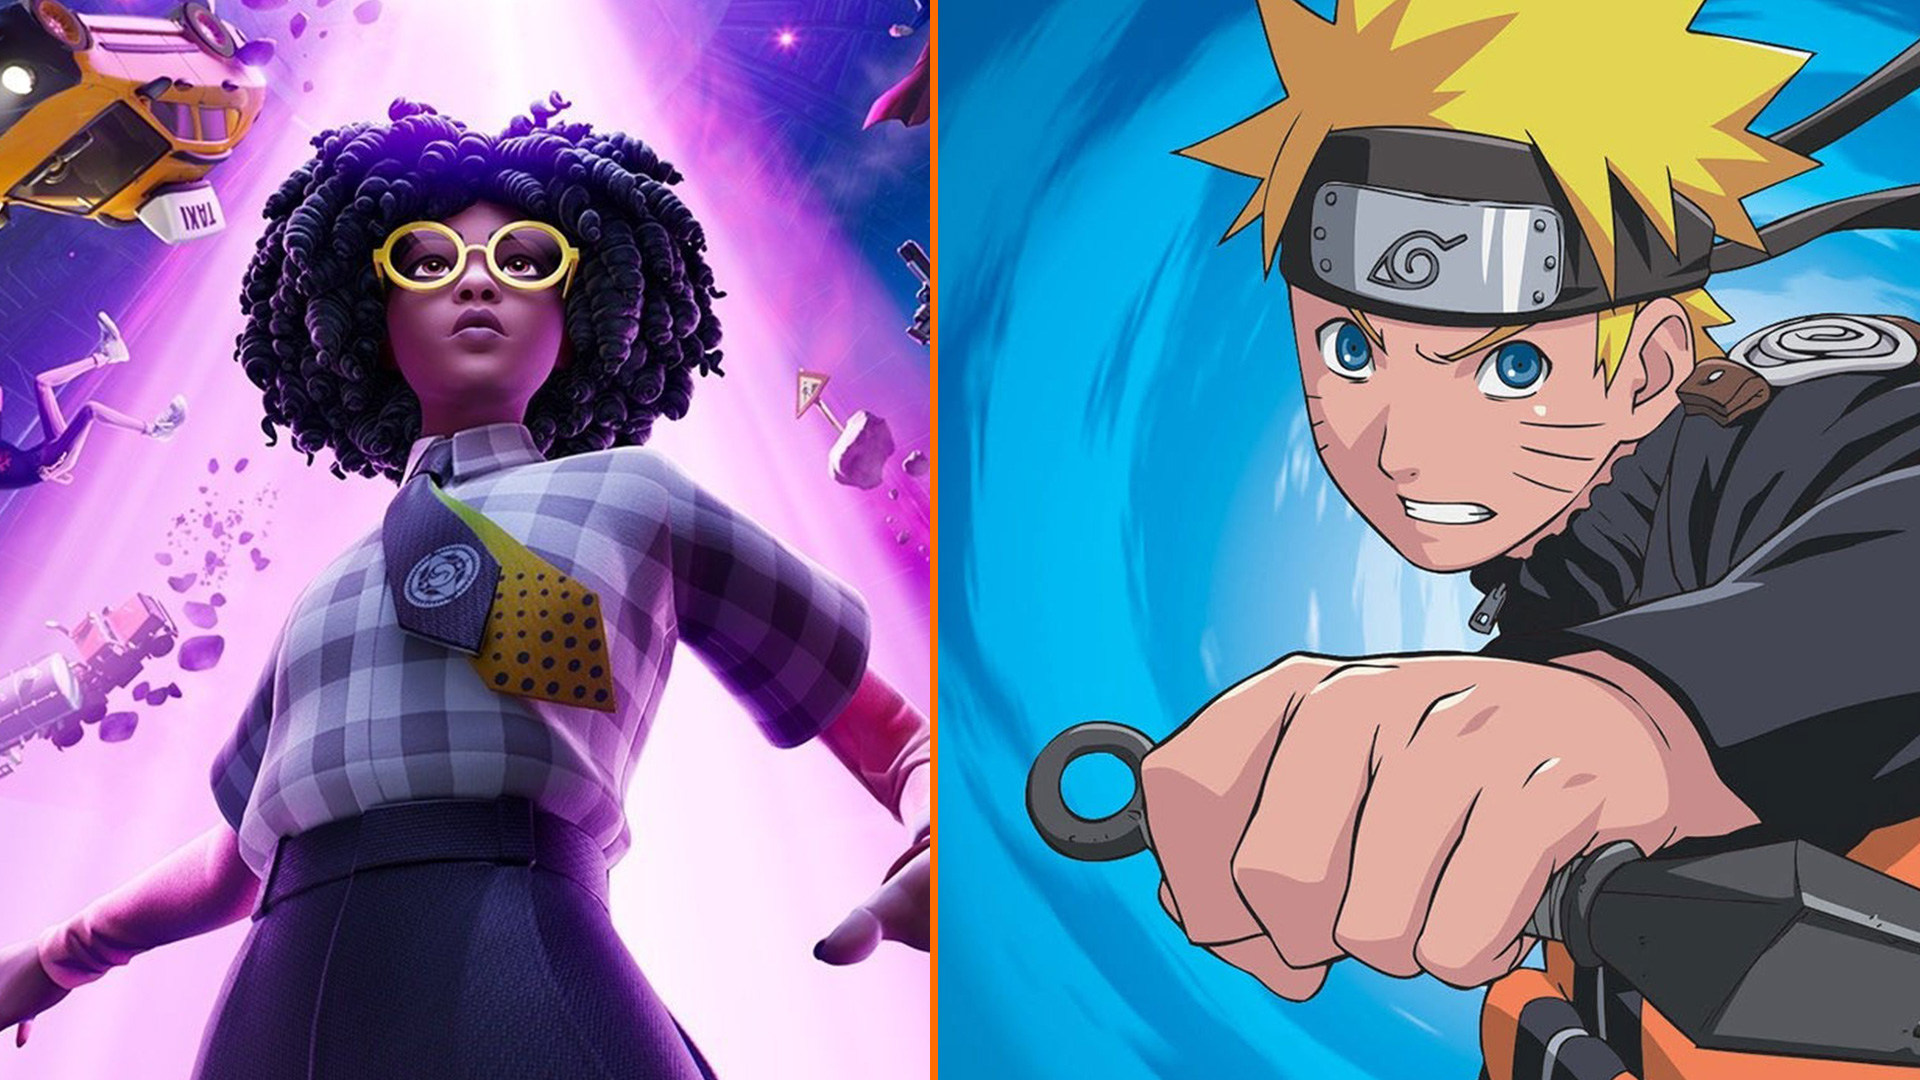 Naruto finally comes to Fortnite on Tuesday, according to the latest leak